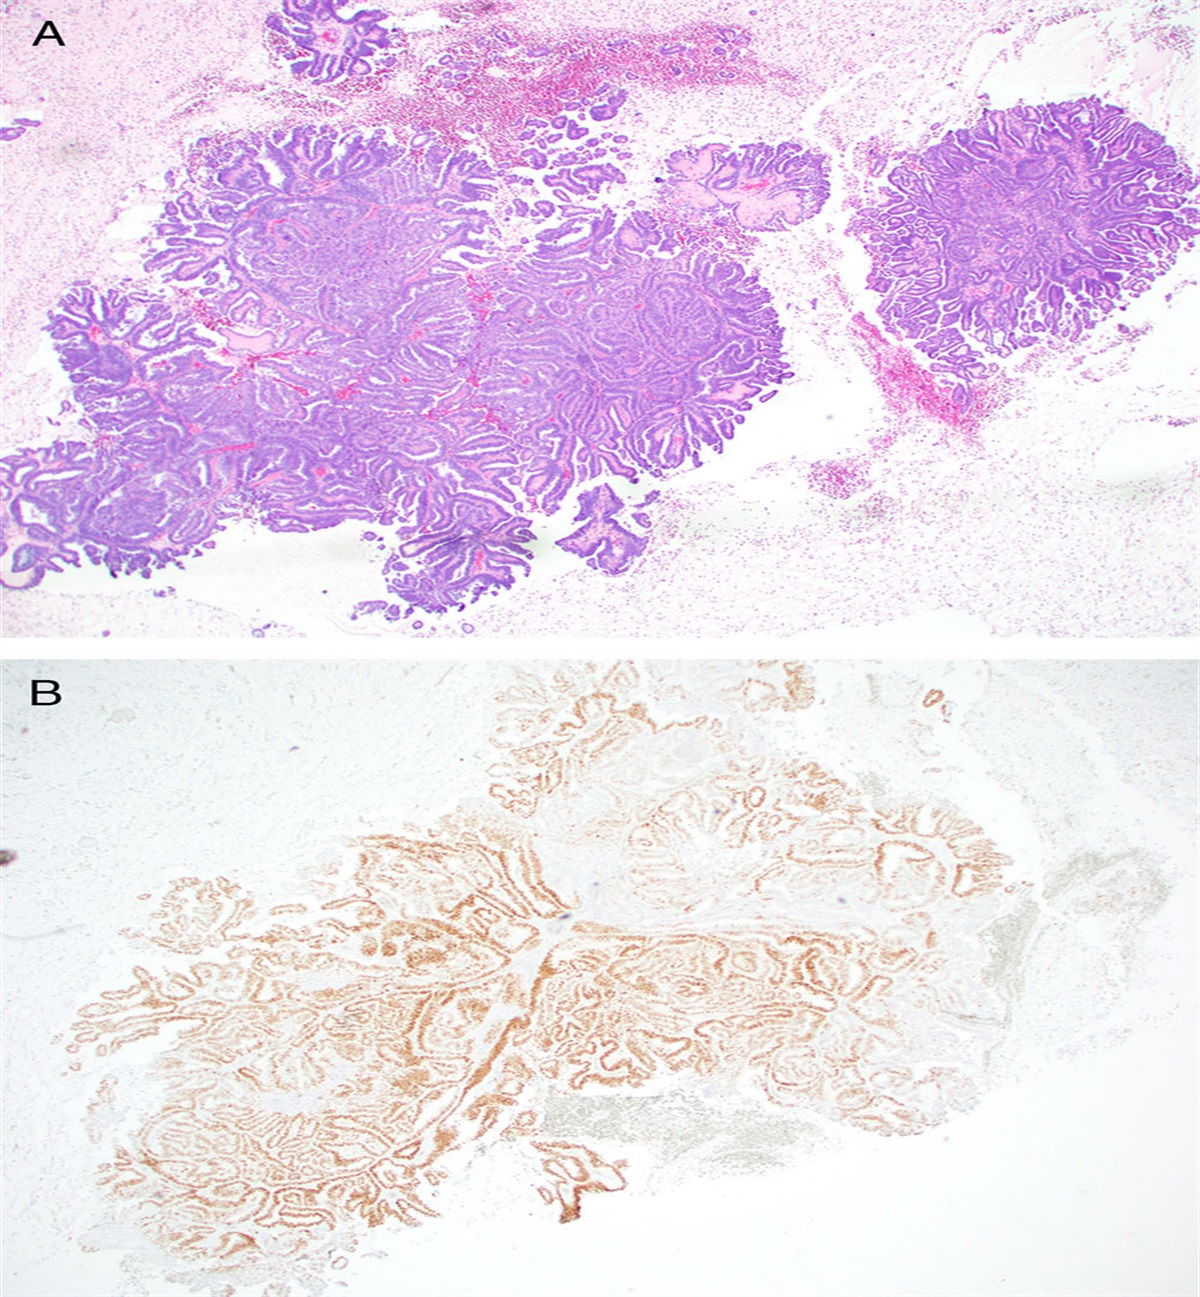 Mesonephric-Like Adenocarcinoma of the Endometrium: Review of the Literature and Practical Diagnostic Recommendations